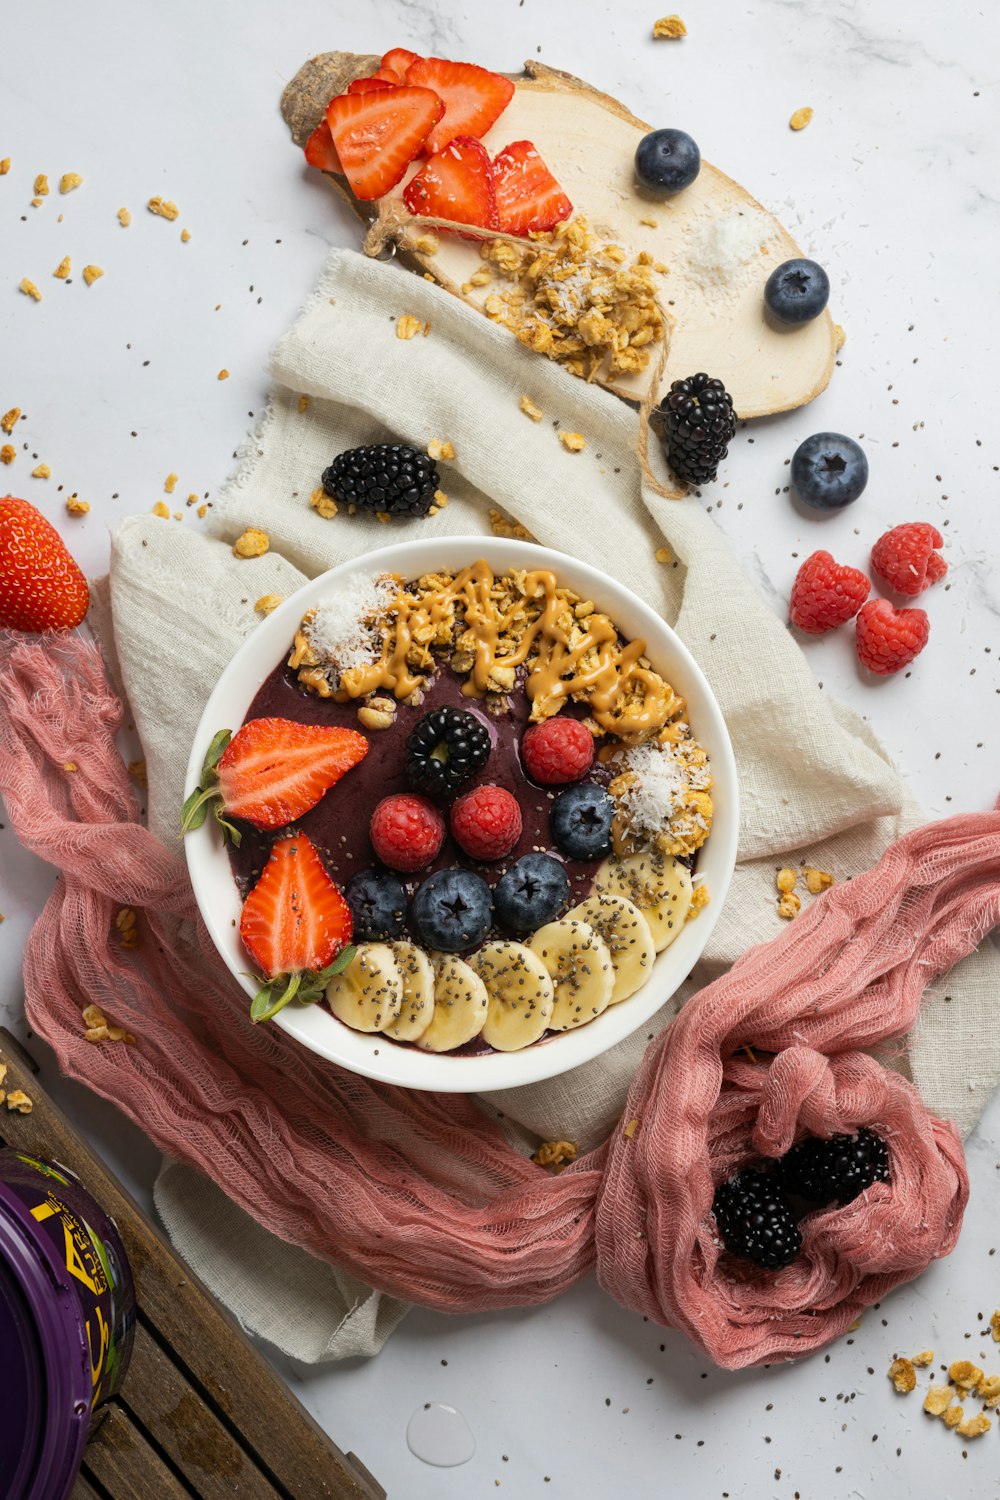 a bowl of cereal with berries, bananas, and other fruits